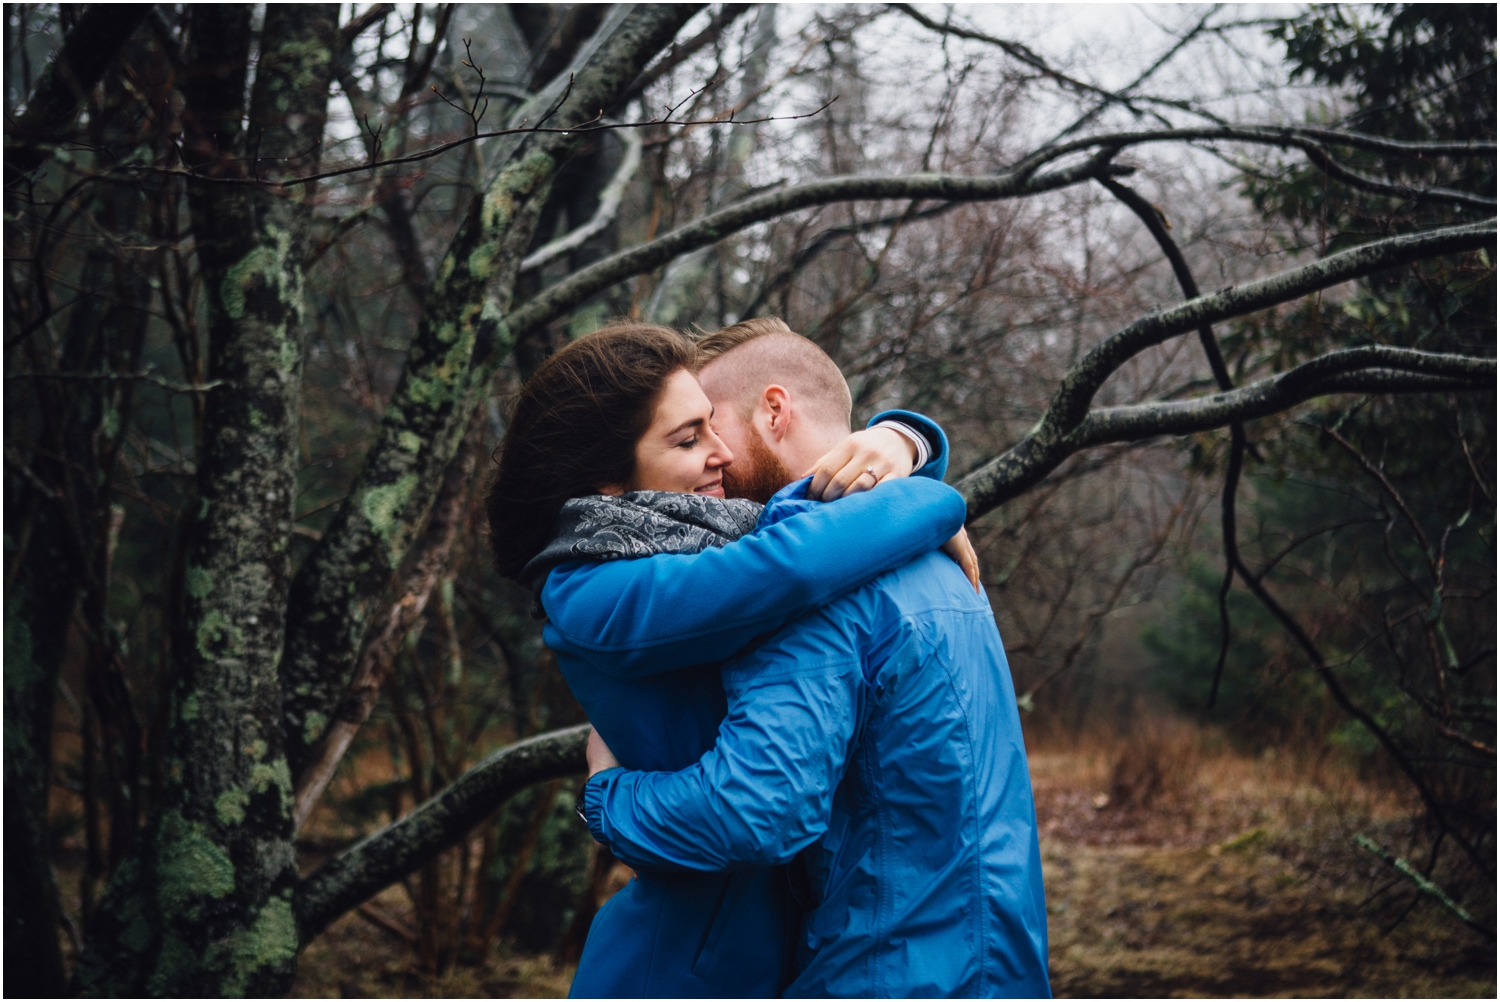 katy-sergent-photography-grayson-highlands-engagement-session-mouth-of-wilson-virginia-damascus-appalachian-trail-tennessee-wedding-elopement_0004.jpg